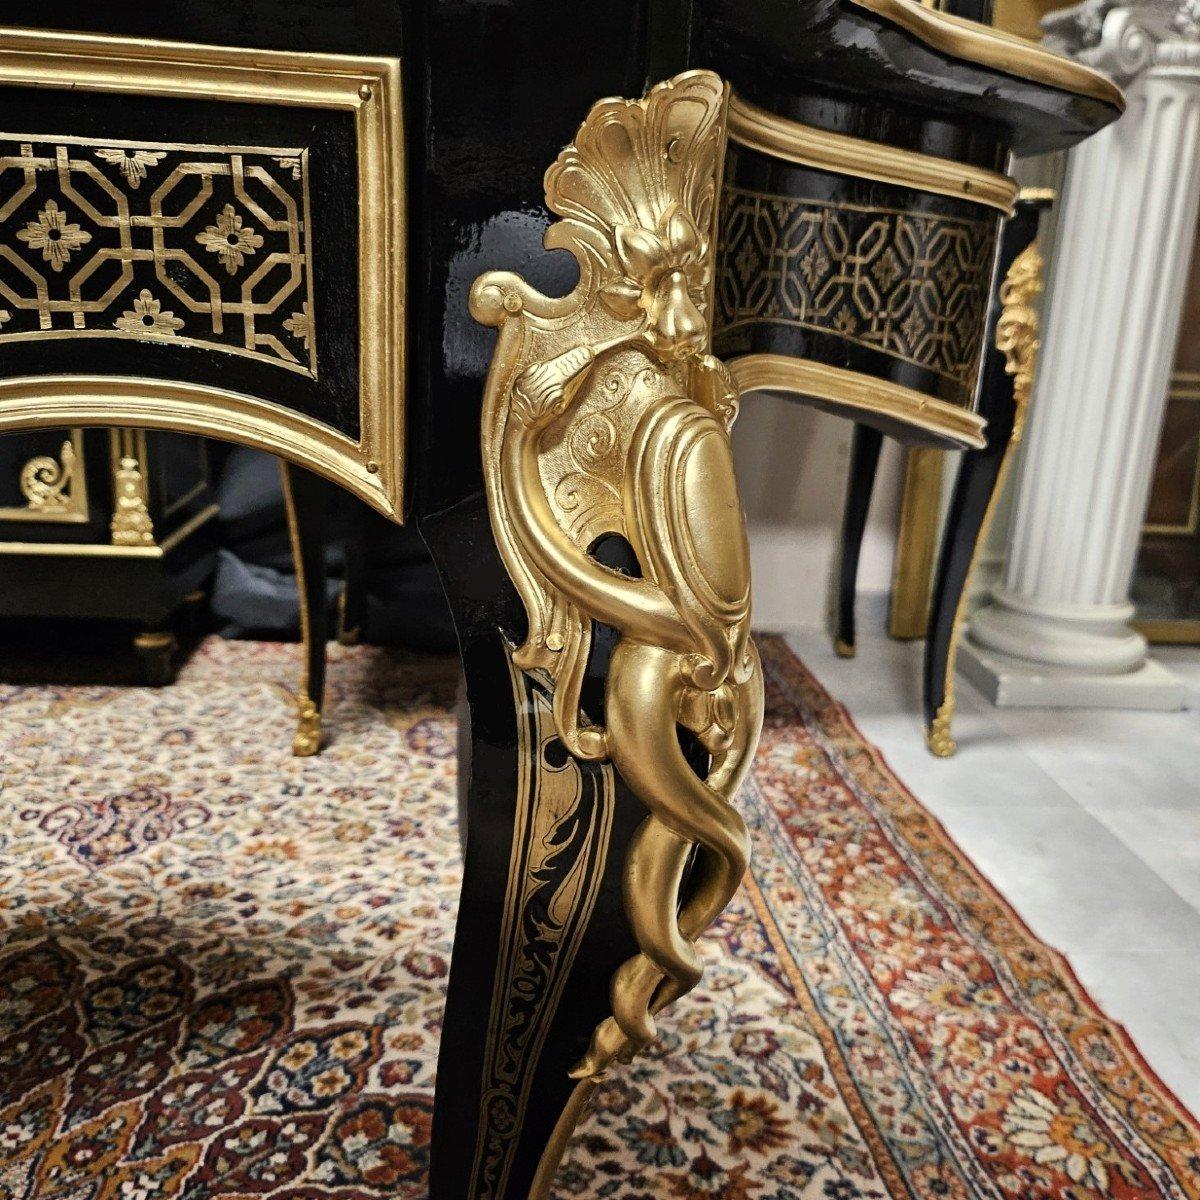 Diehl Black French Table Napoleon III Boulle Brass Gilt Bronze 19th Century For Sale 3